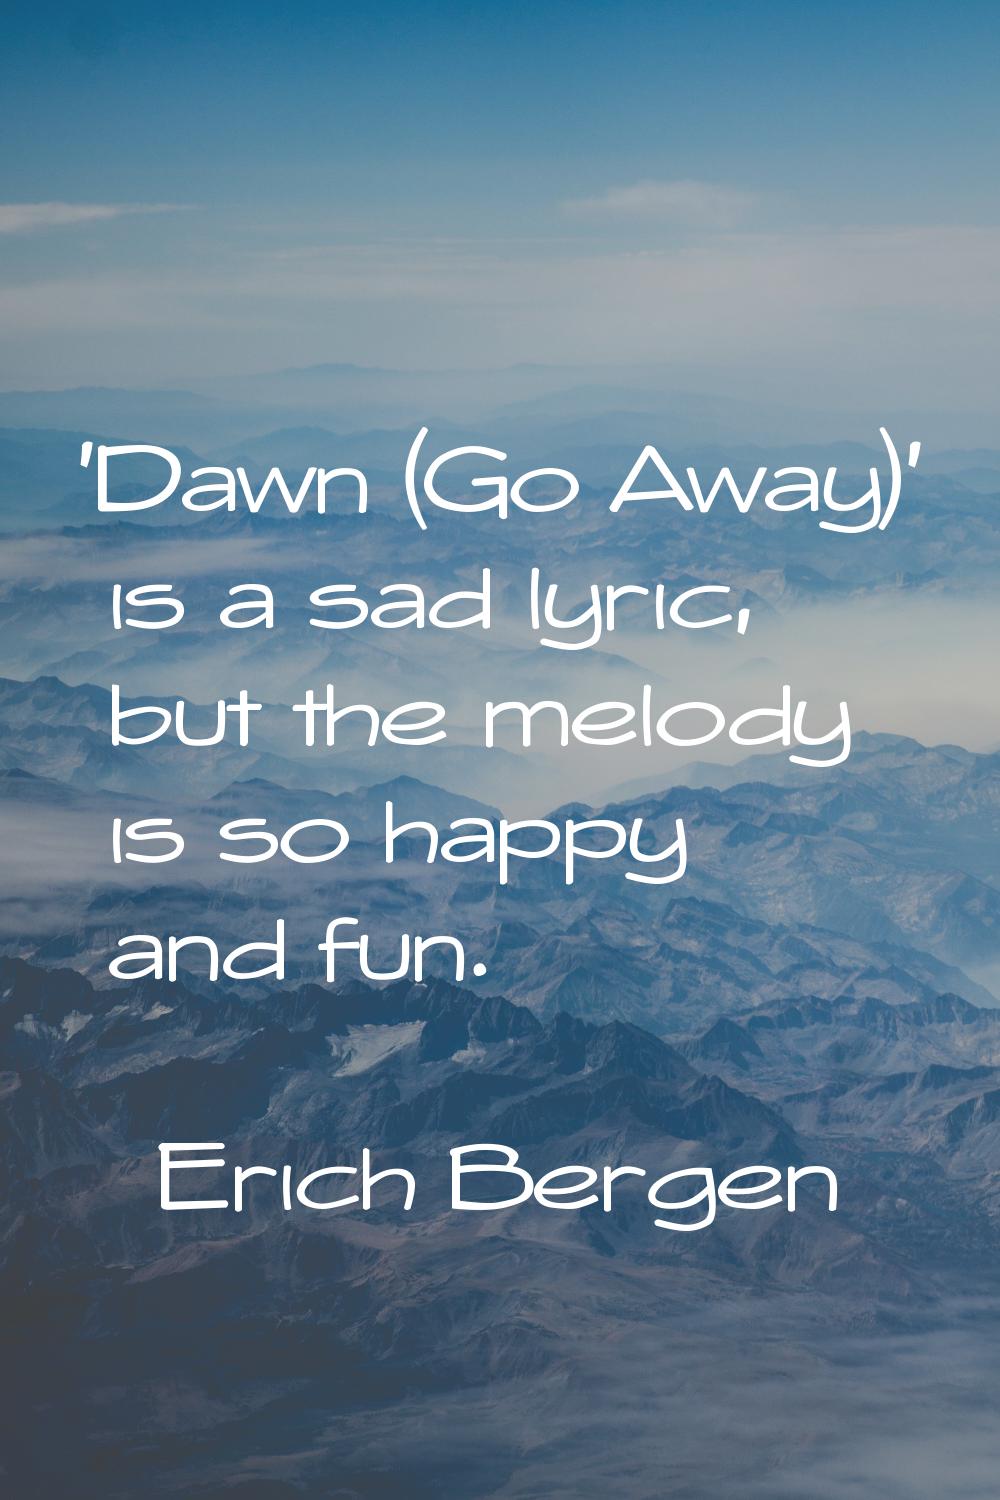 'Dawn (Go Away)' is a sad lyric, but the melody is so happy and fun.